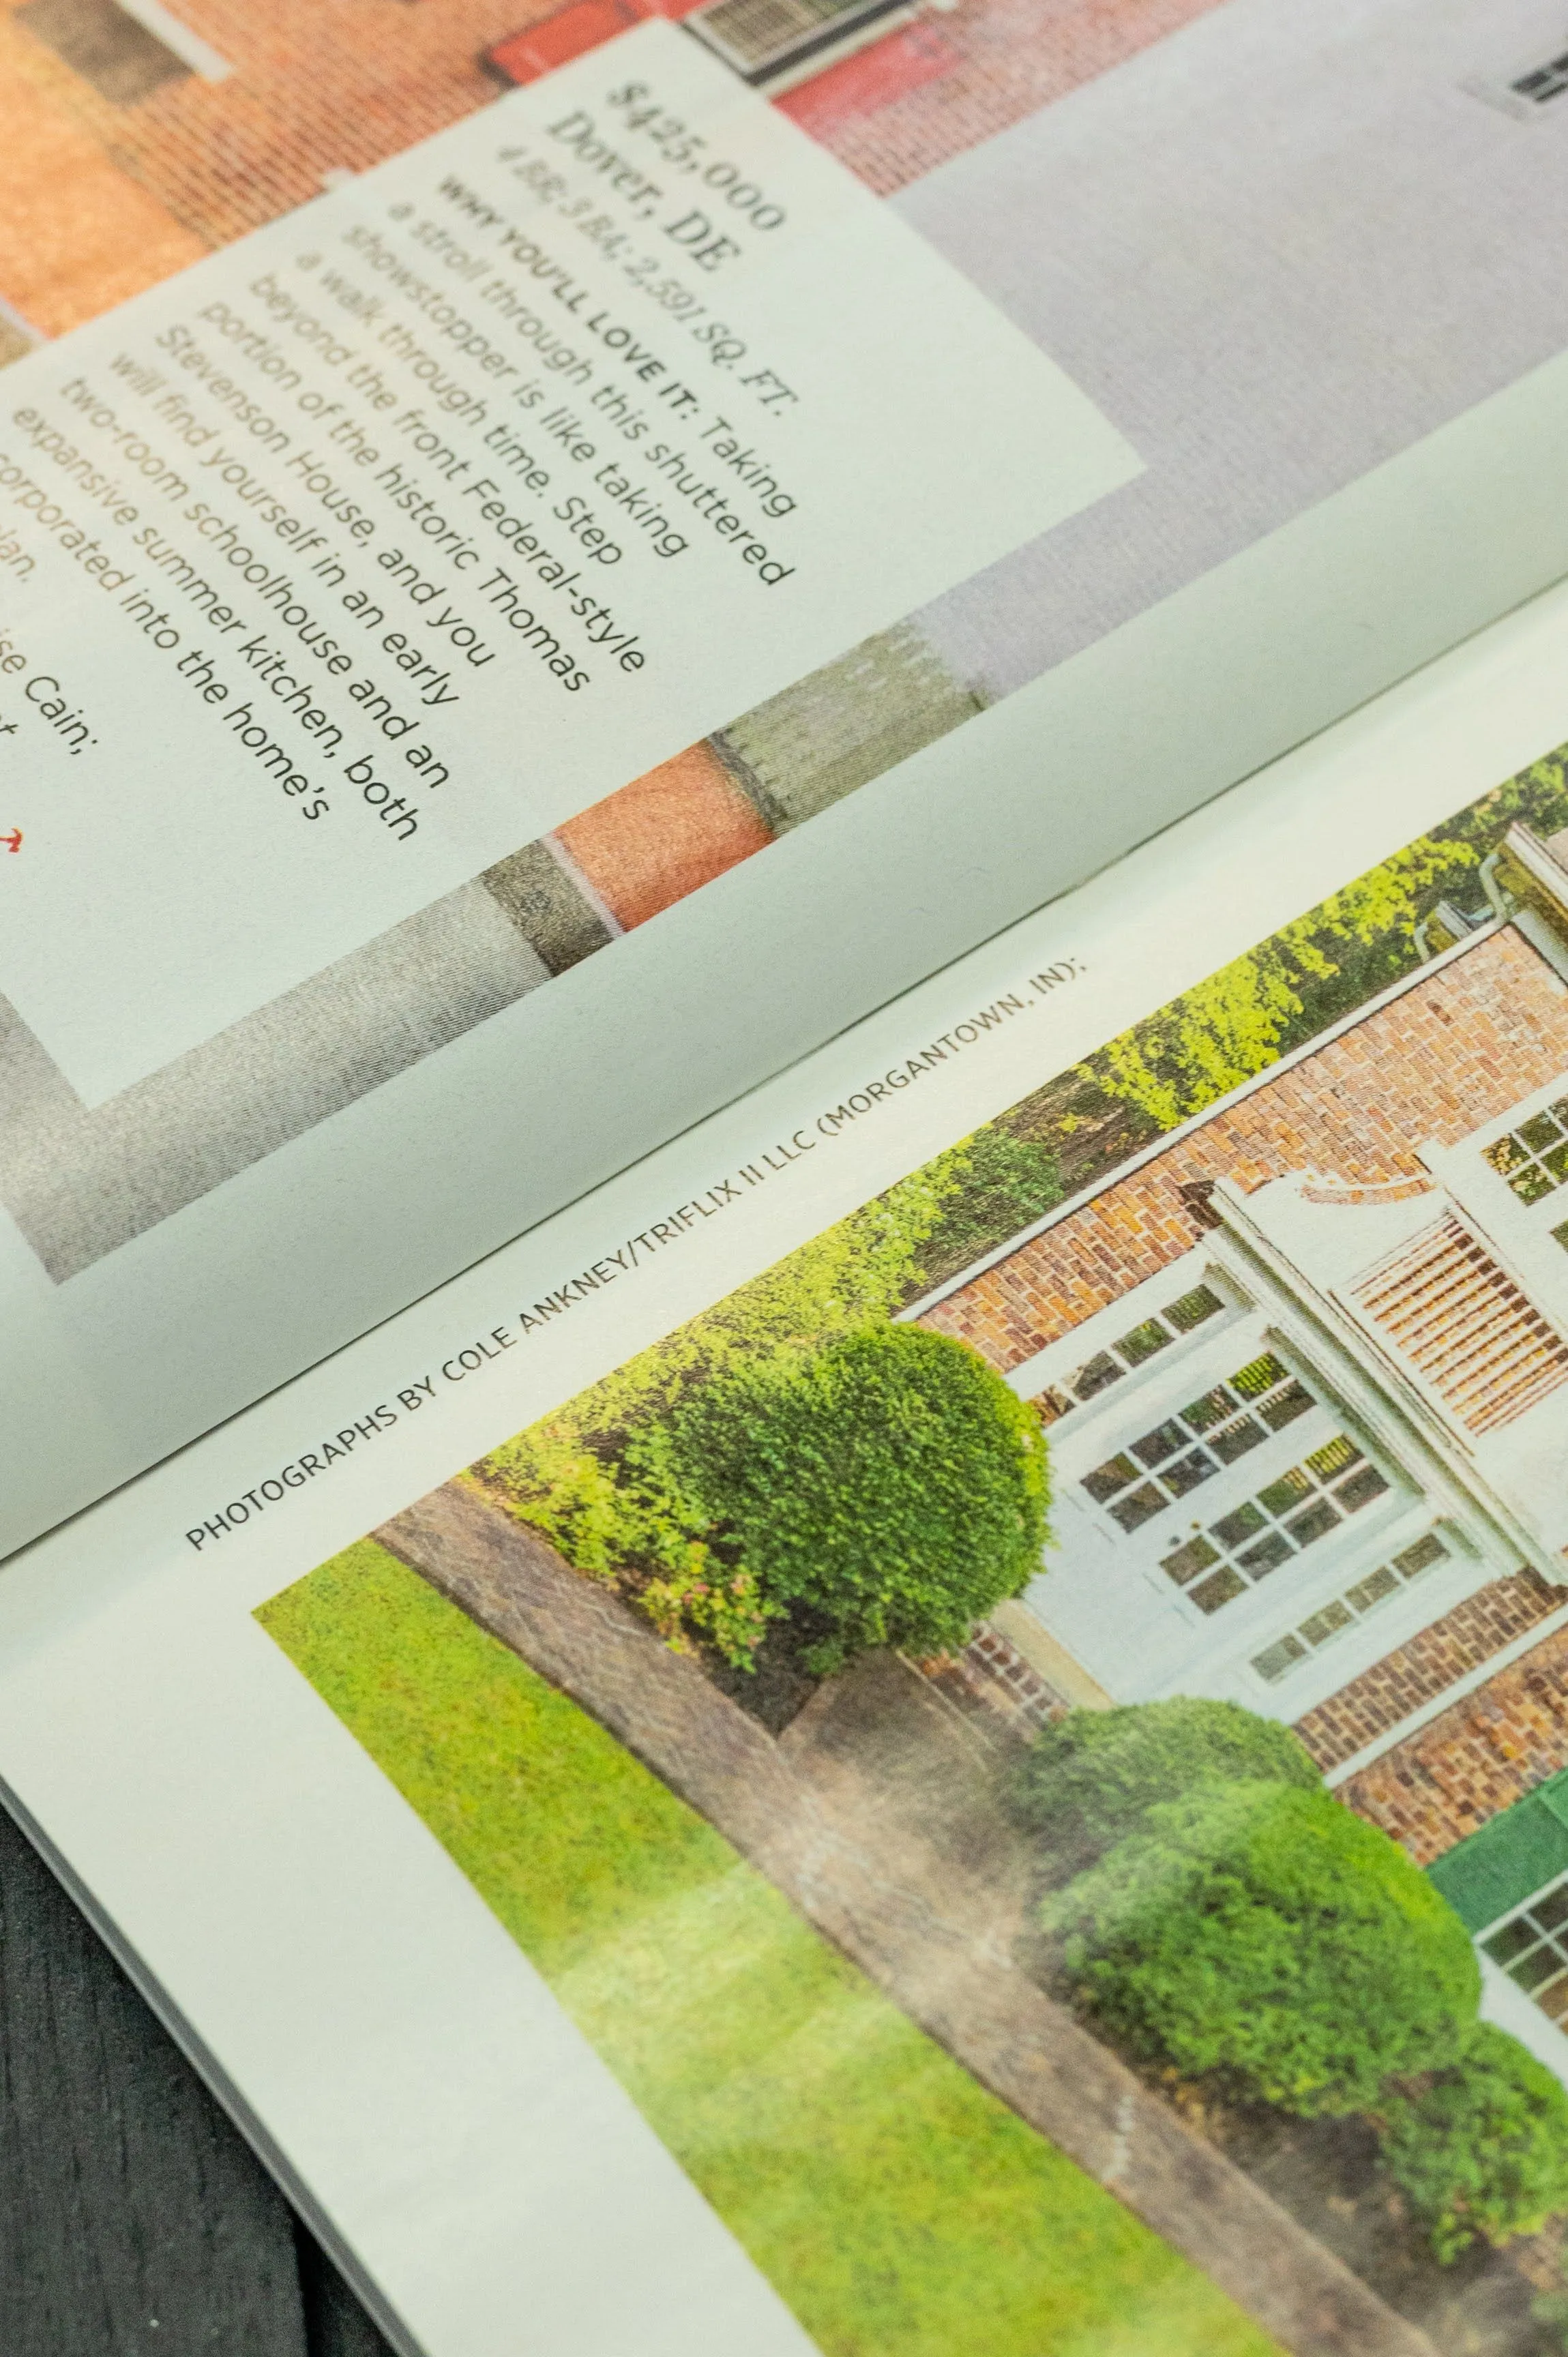 Close-up view of an open magazine featuring a real estate listing with a photograph of a brick house and green shrubbery, and a credit line for the photographer at the bottom of the page.